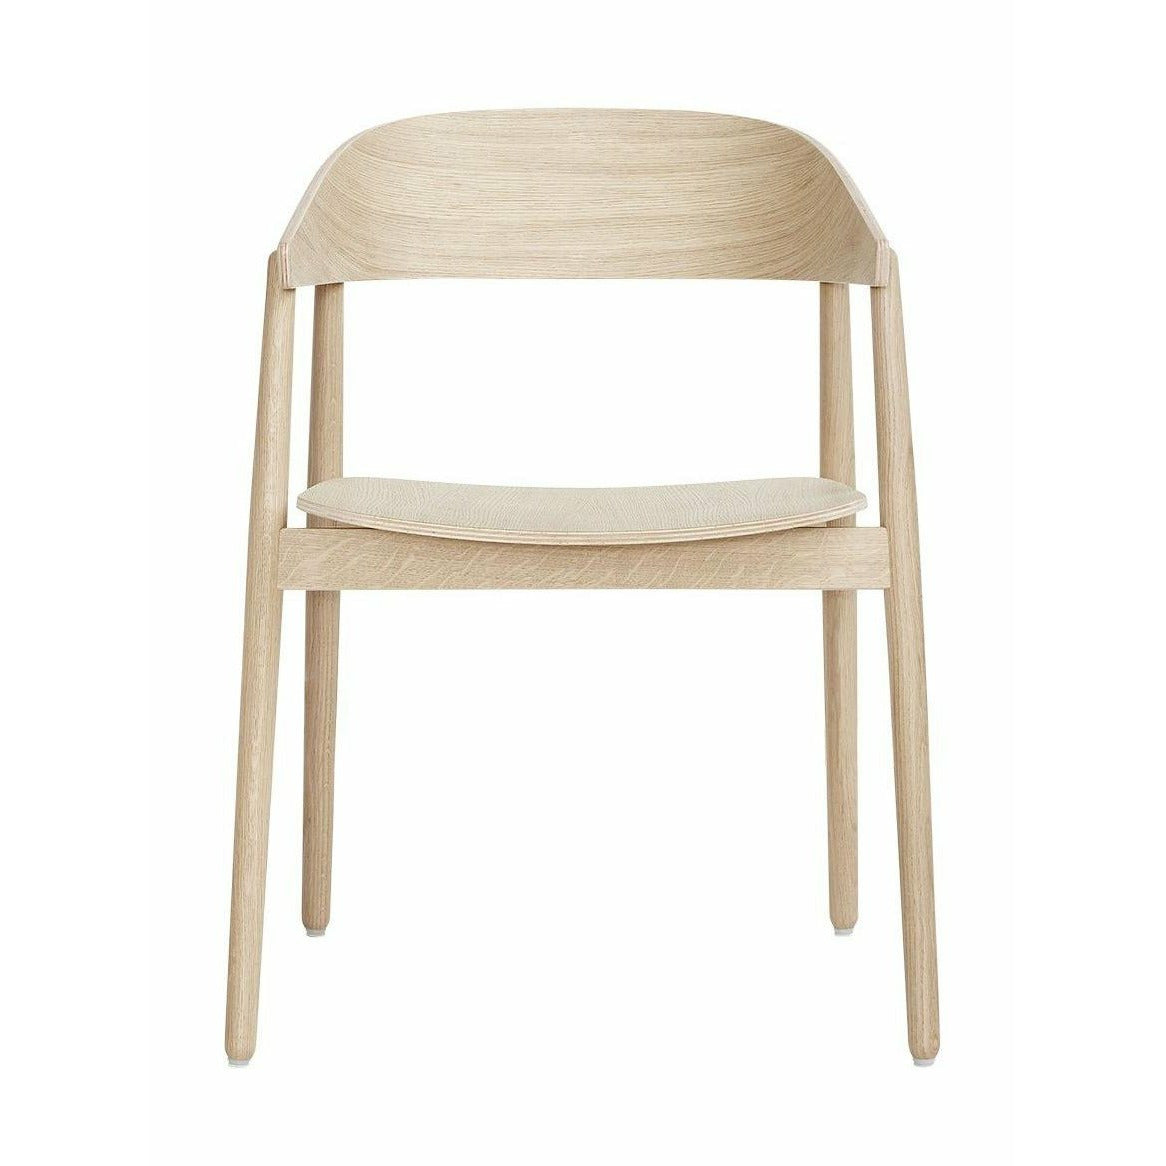 Andersen Furniture Ac2 Chair Oak, White Pigmented Lacquered